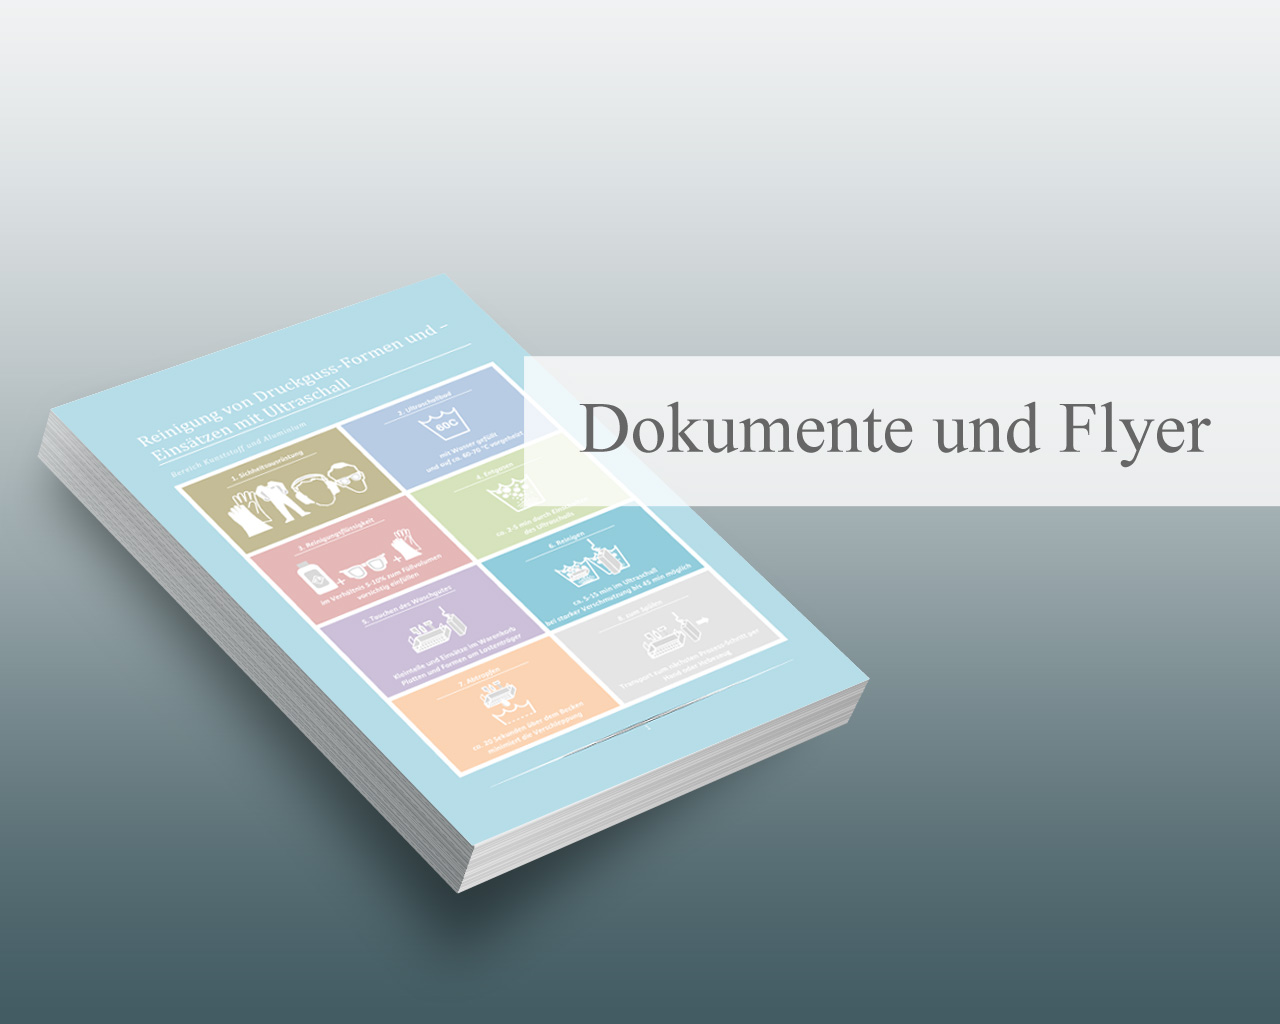 You are currently viewing Dokumente und Flyer